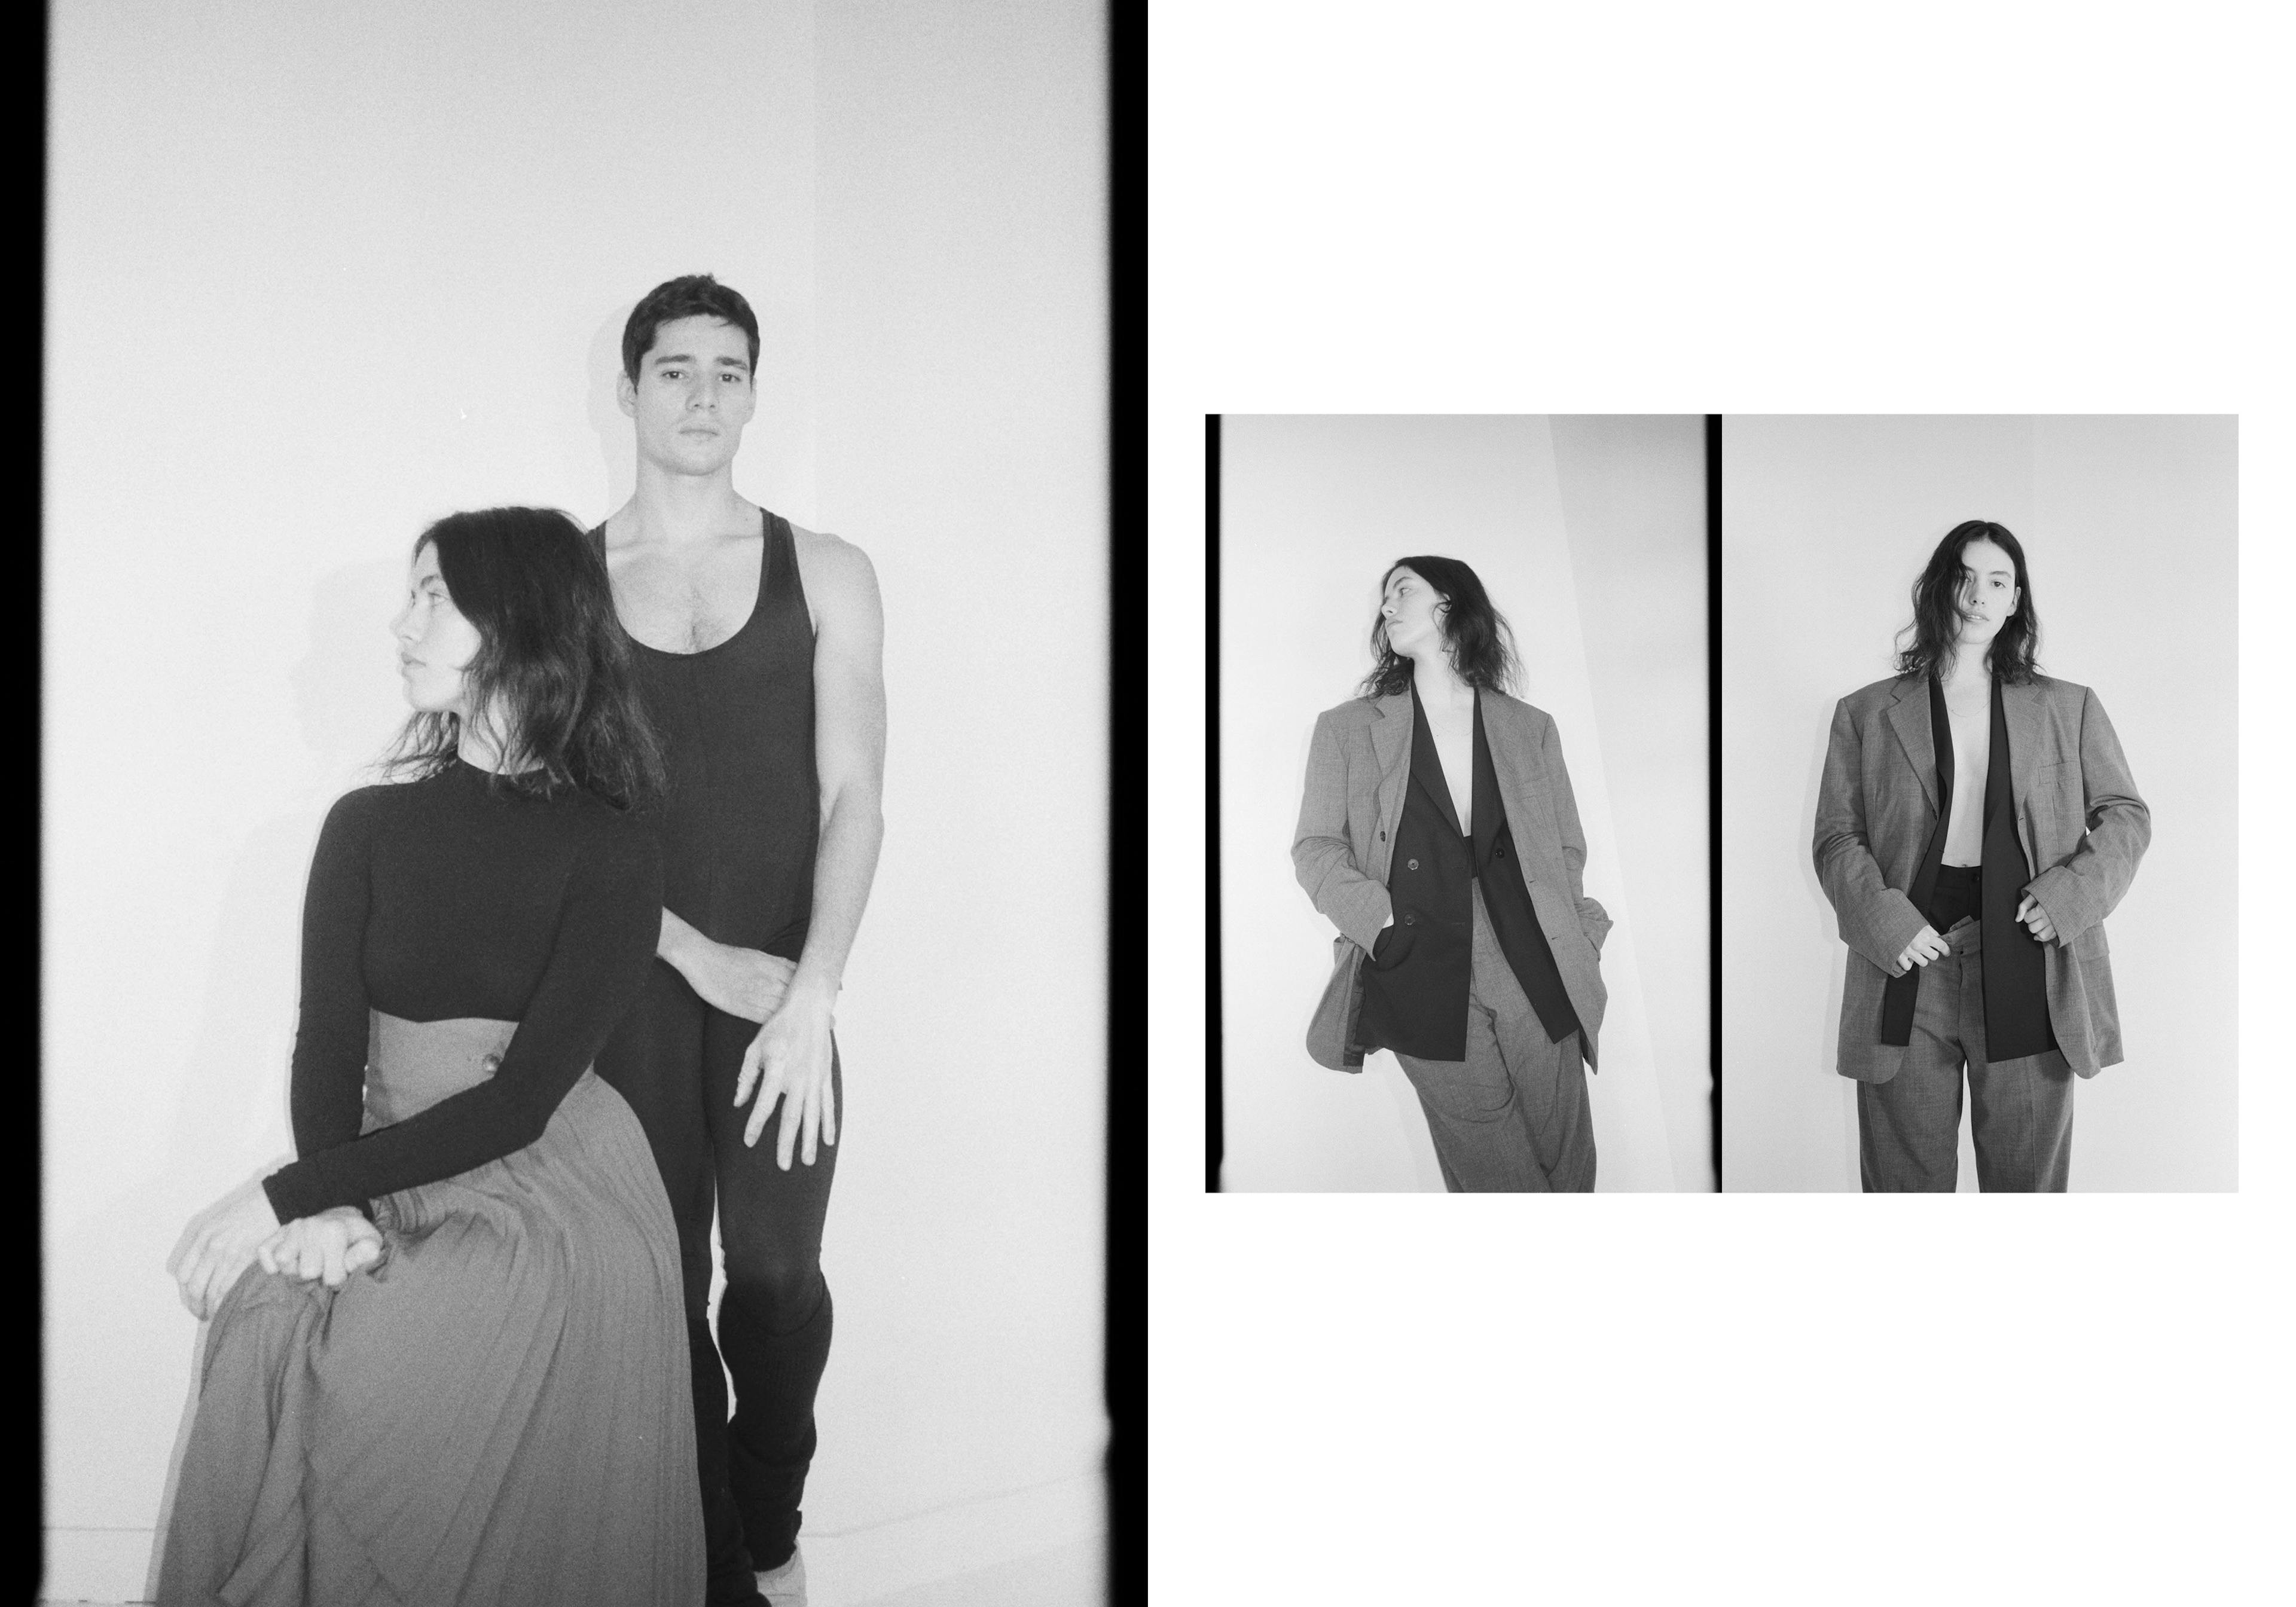 Left: Della Costa wears top by Commando. Skirt by Simonett. Right: Vintage jacket and pants by Prada. Jacket and pants, worn underneath, by Theory.